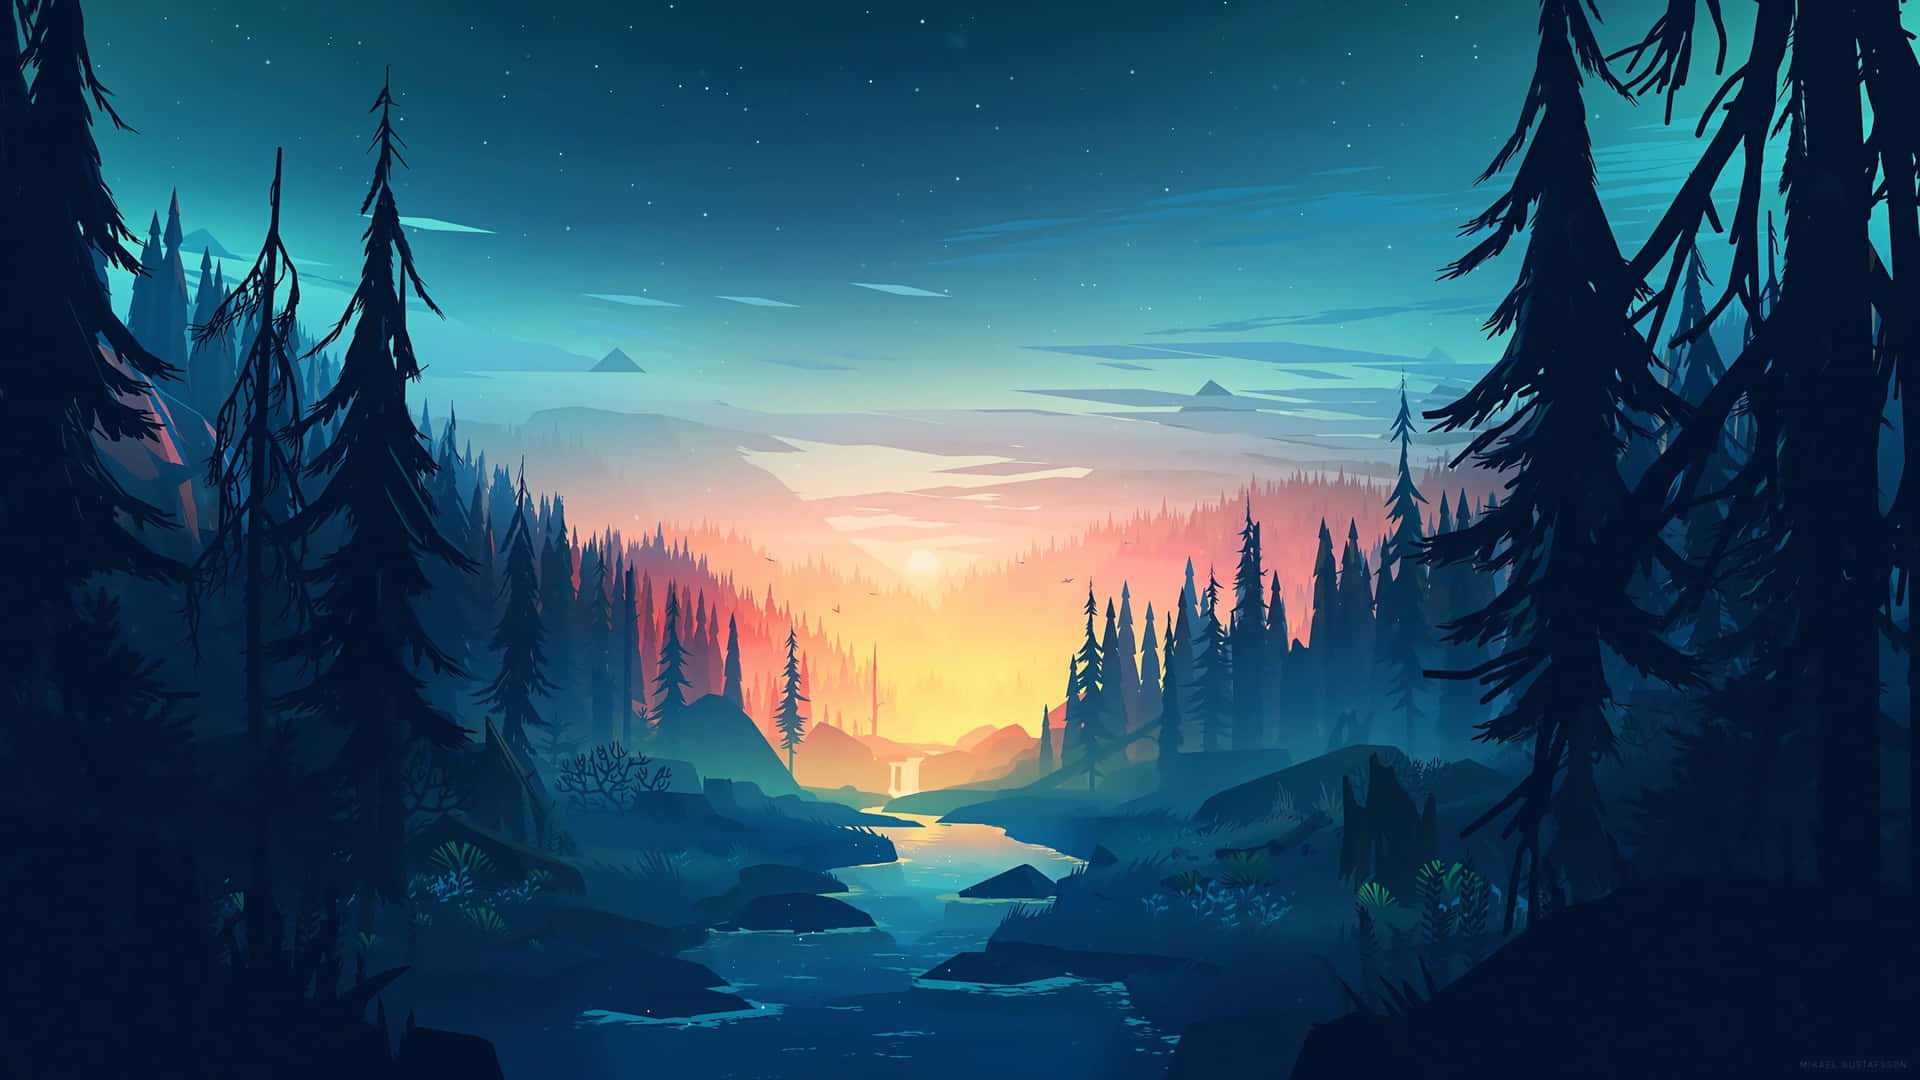 "A Magical Sunset Painting" Wallpaper